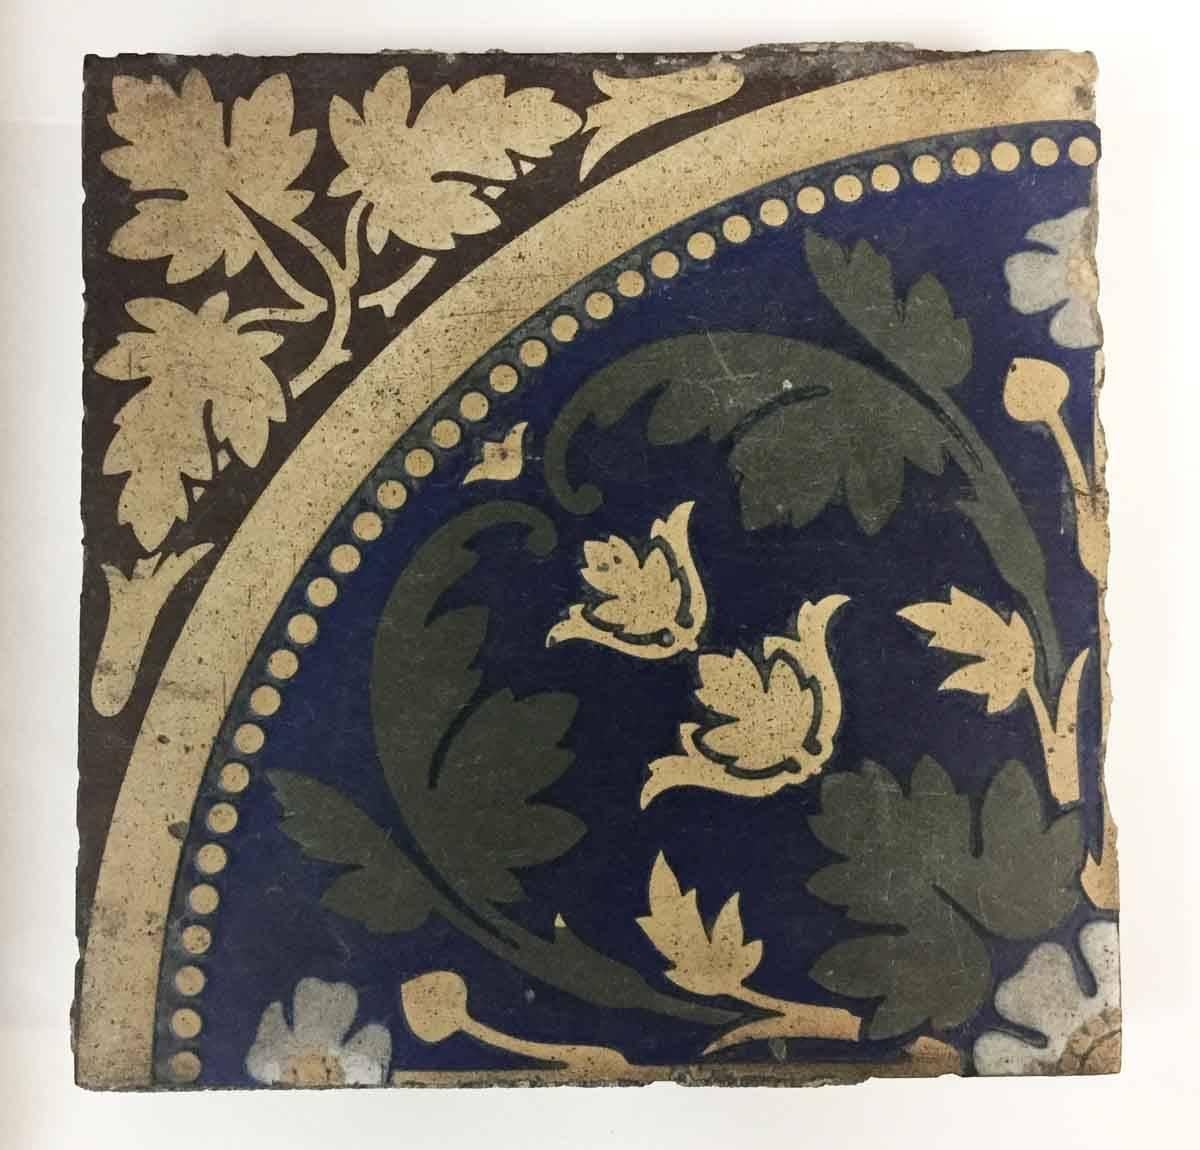 1920s red, blue green, tan and white in color. This includes 74 arched style tiles and 91 flower style tiles. It calculates to 40 square feet, with 165 tiles total. Some tiles have chips from salvaging, so allow 20% leeway. Priced as a set. This can